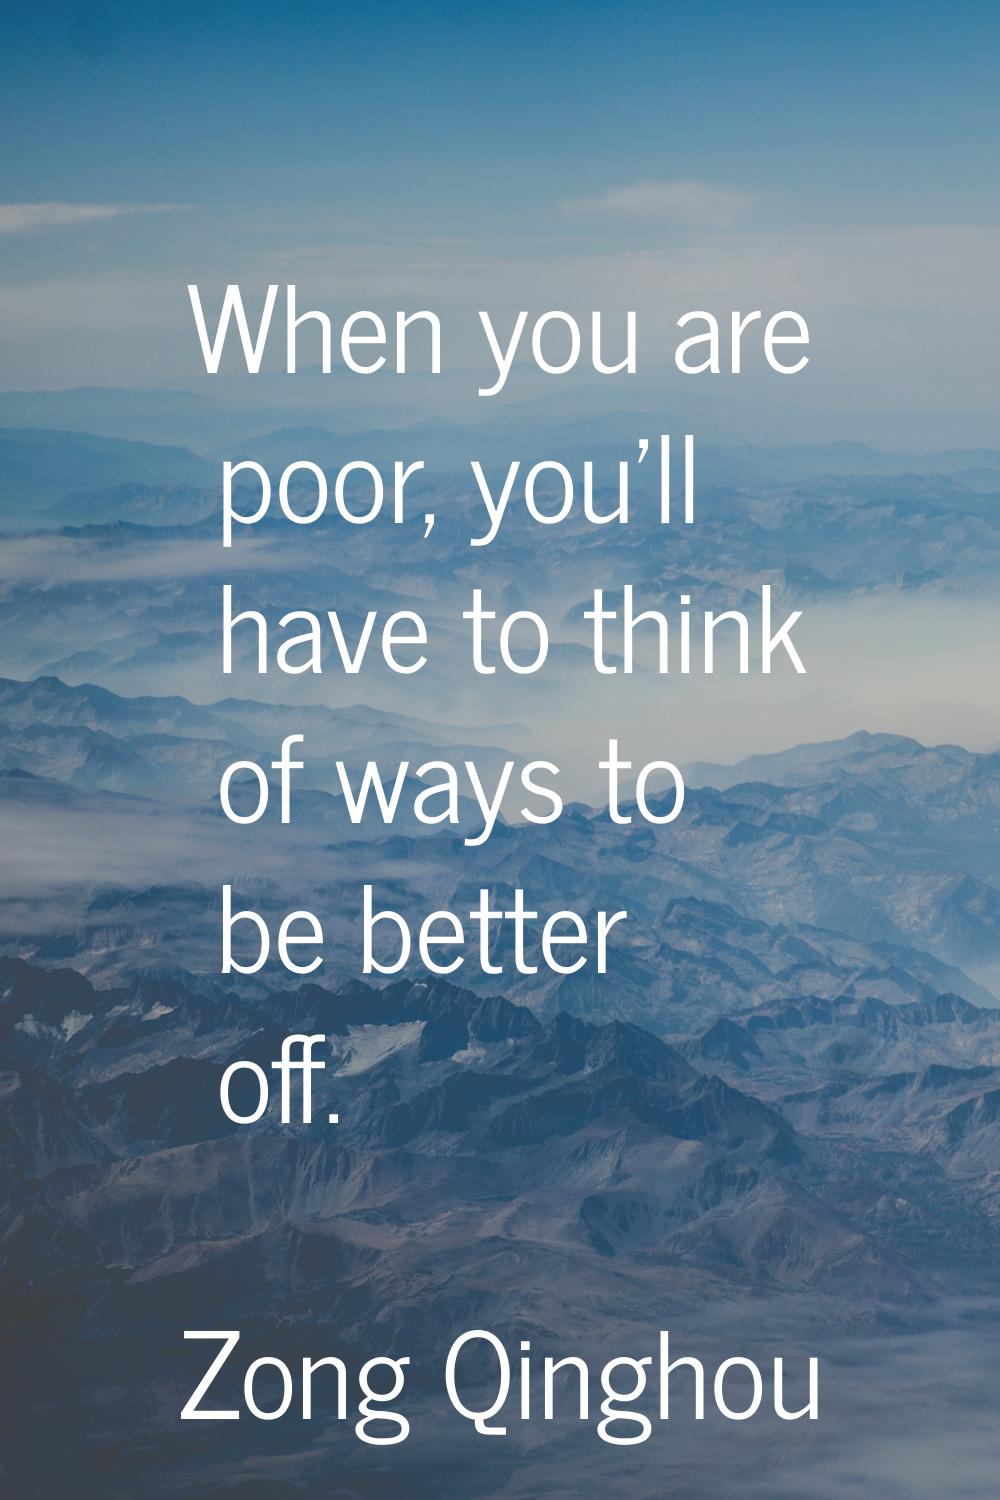 When you are poor, you'll have to think of ways to be better off.